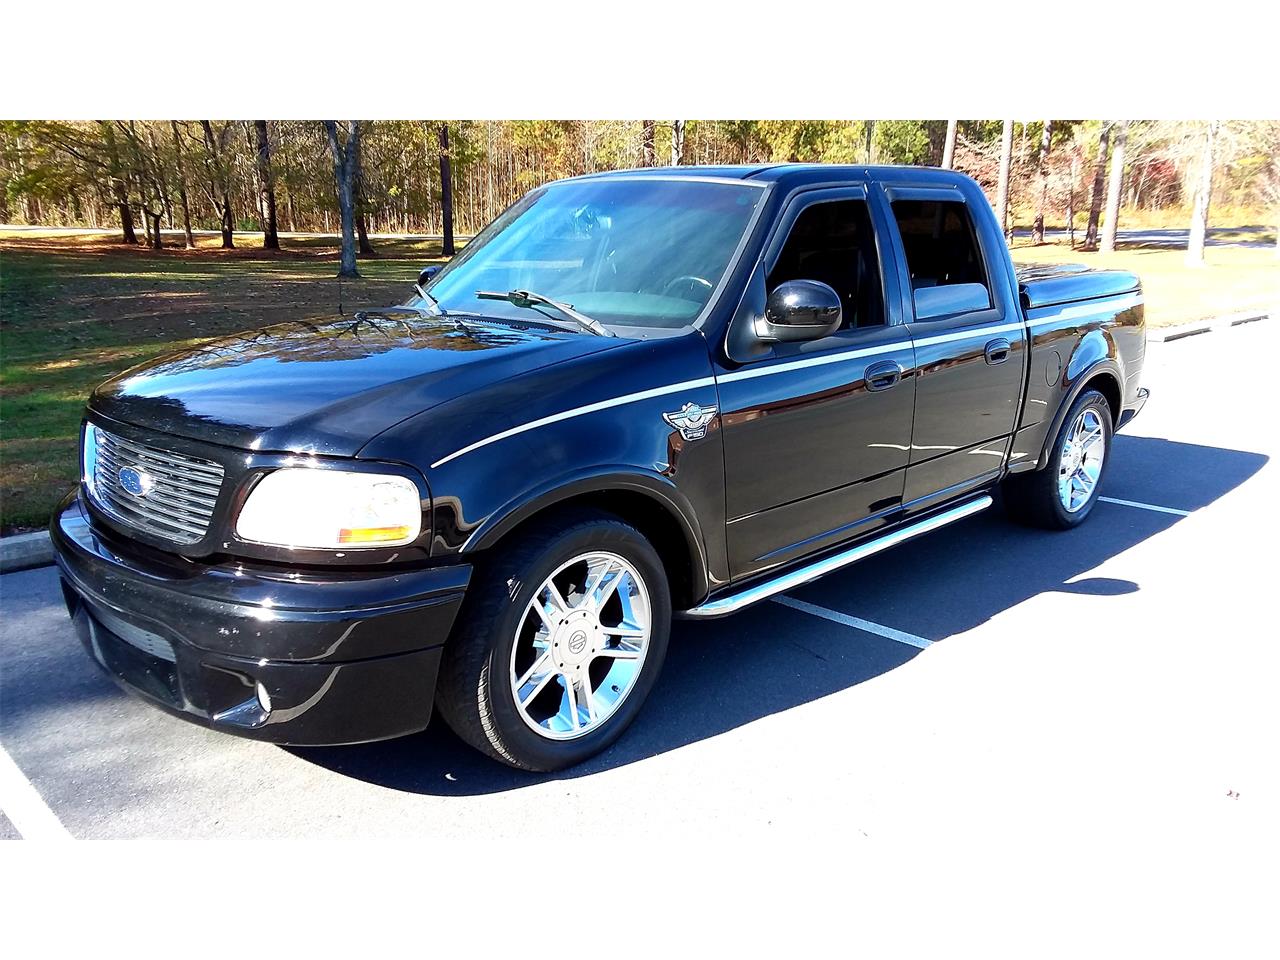 2003 Ford Harley-Davidson F-150 for Sale | ClassicCars.com | CC-1168315